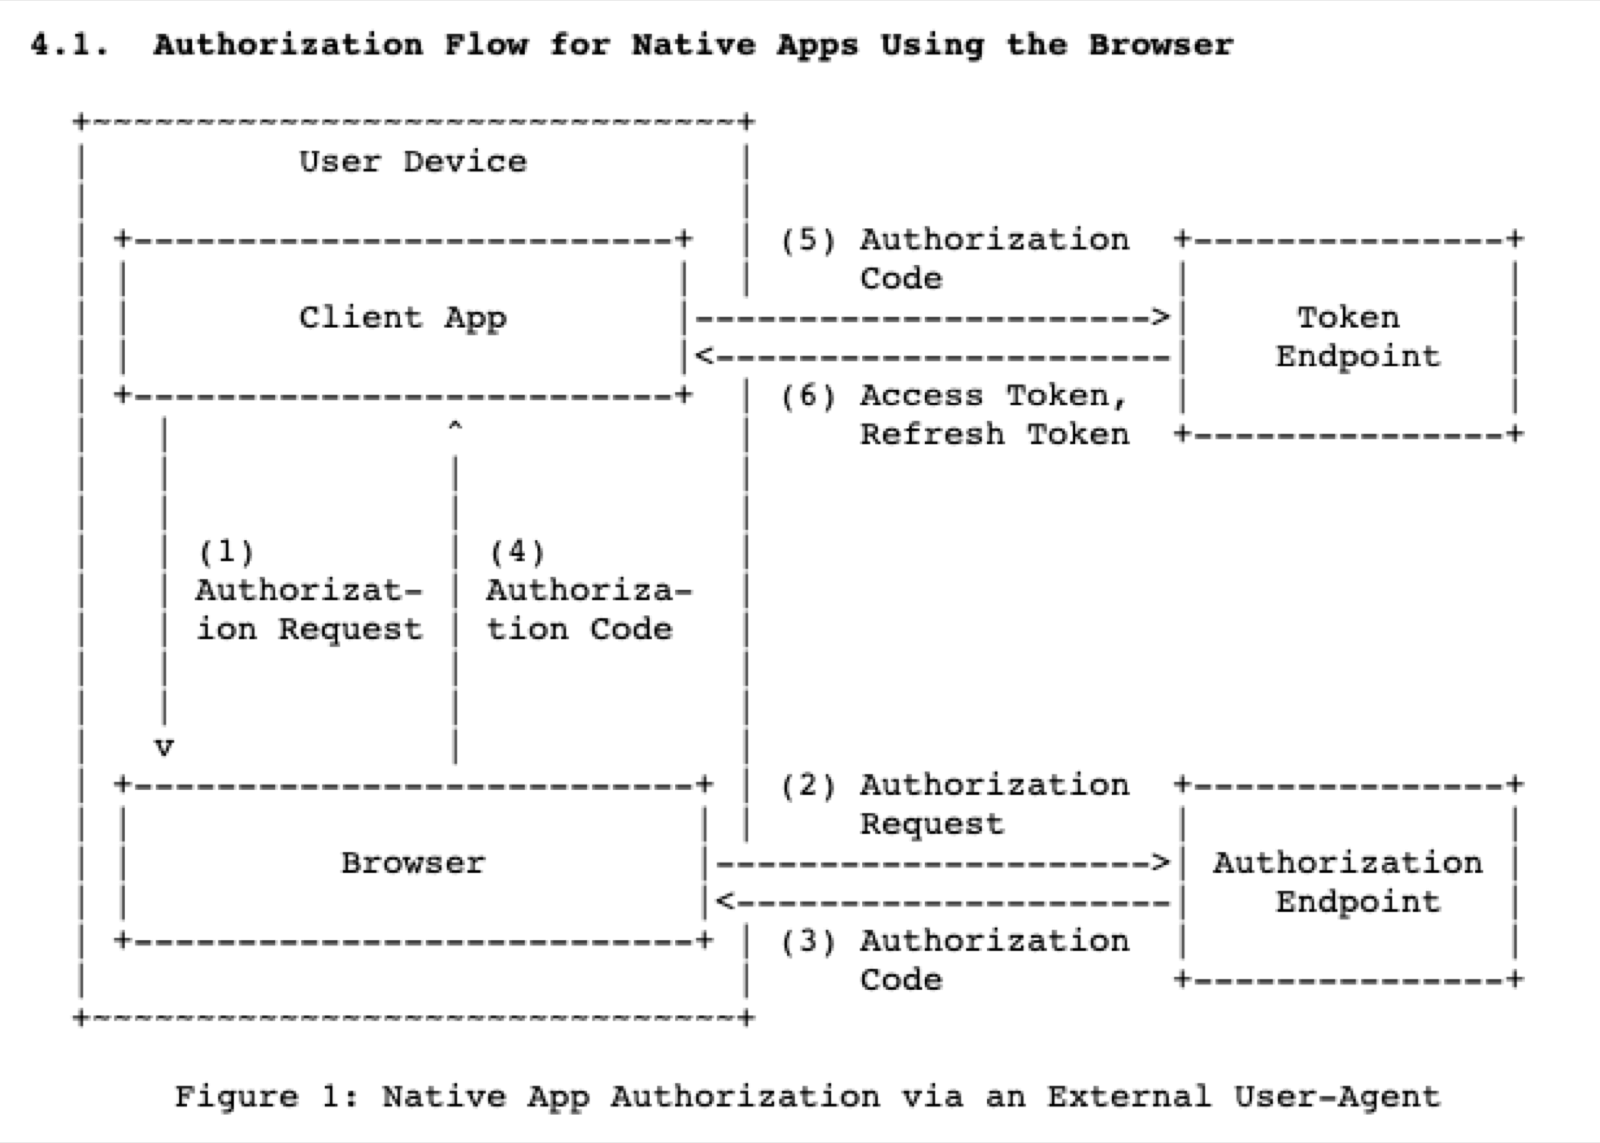 The authorization code flow for native applications.